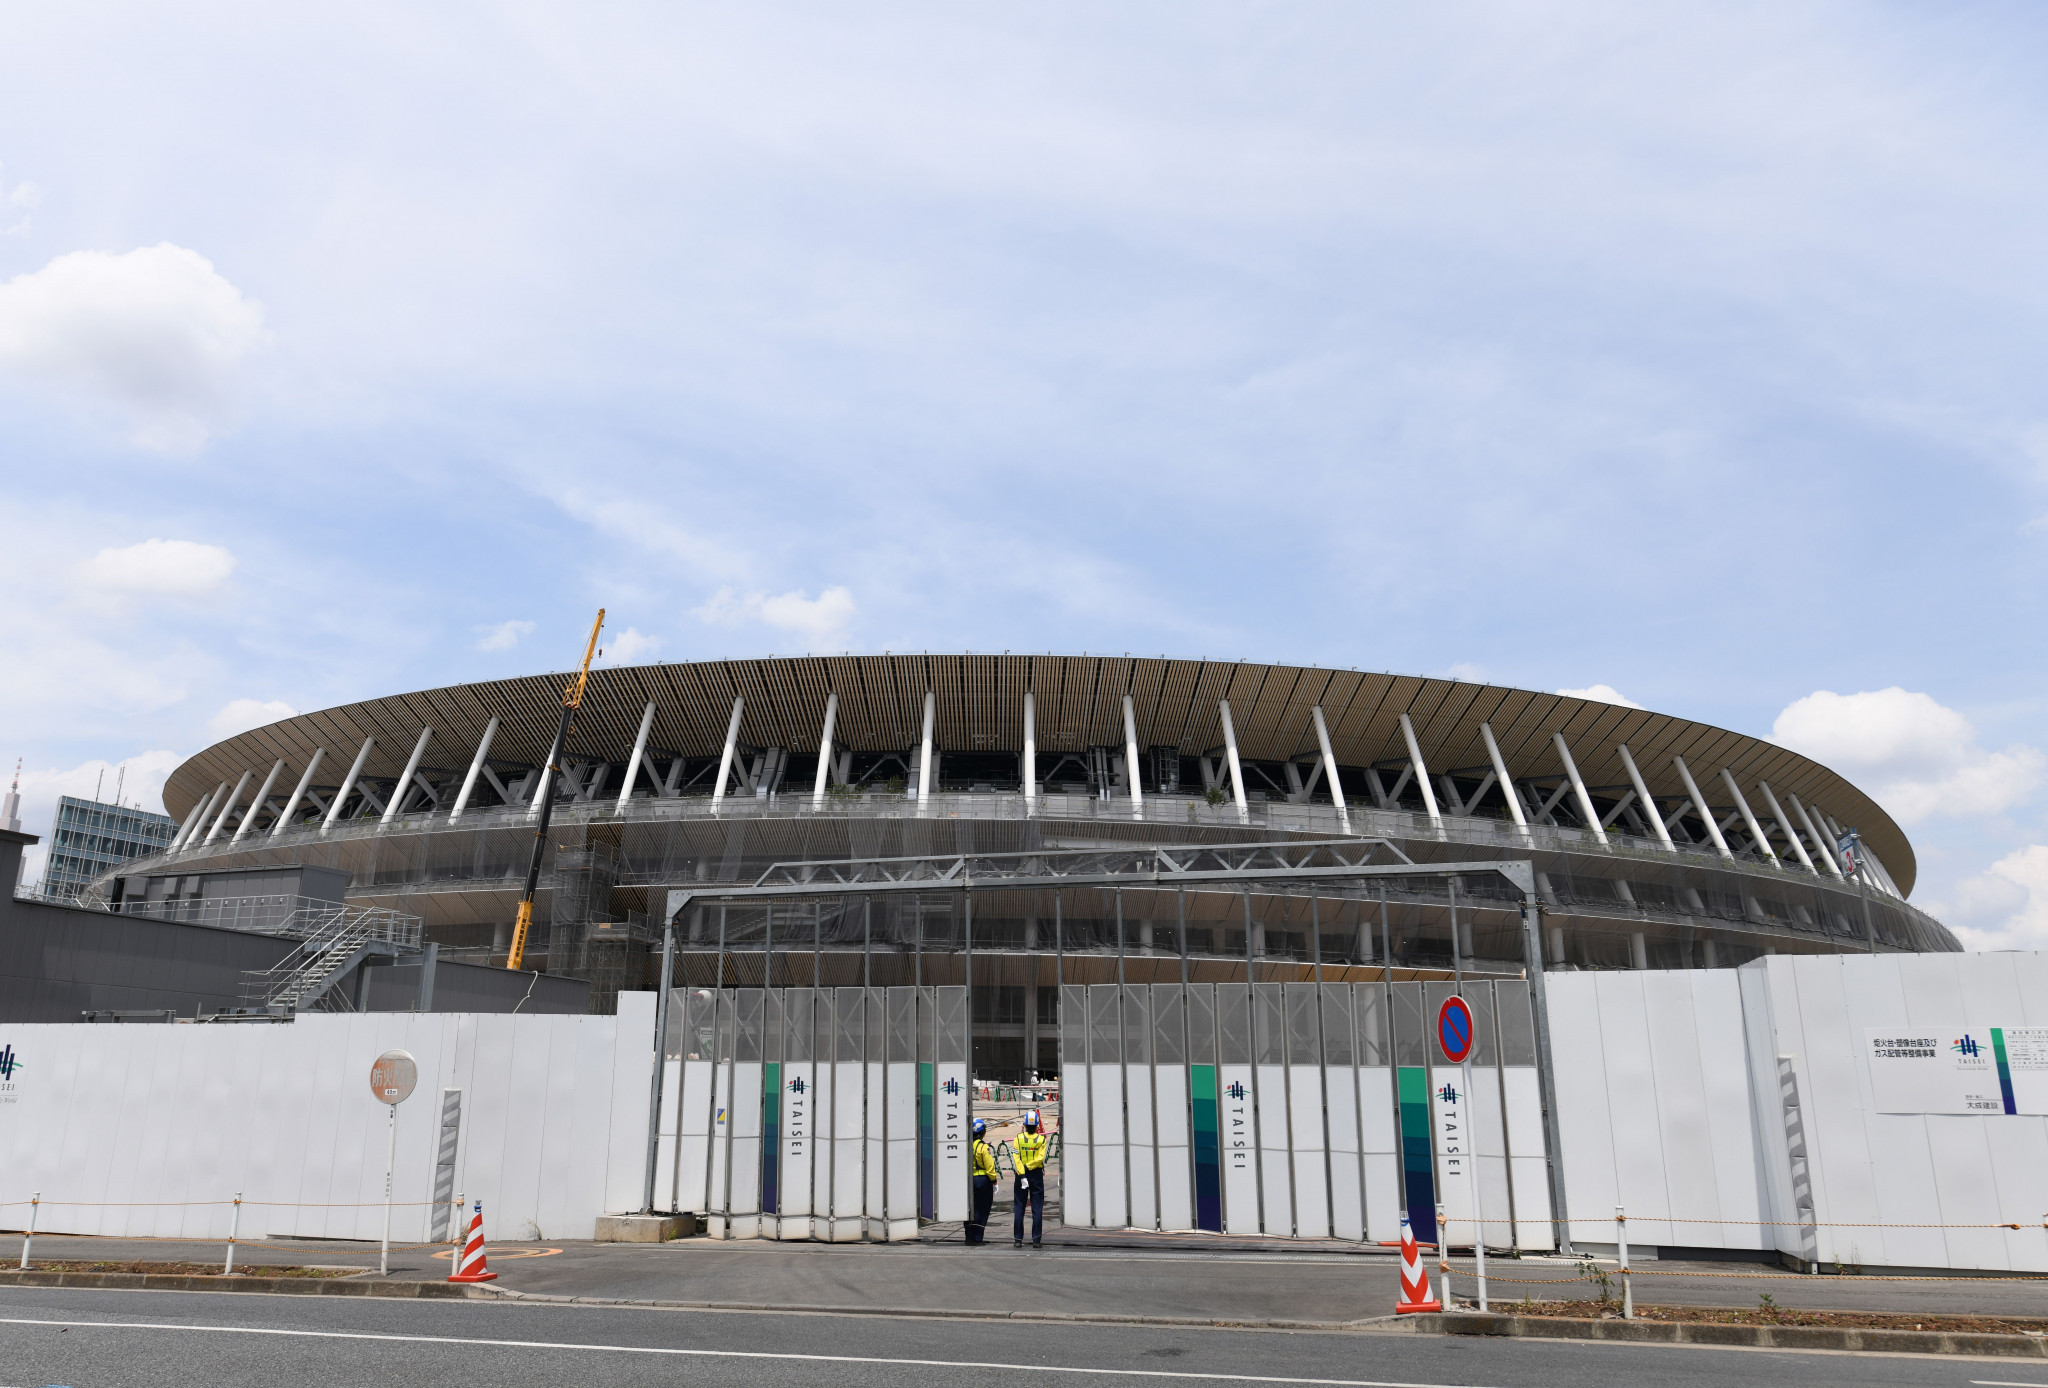 Construction continues at several venues ©Getty Images